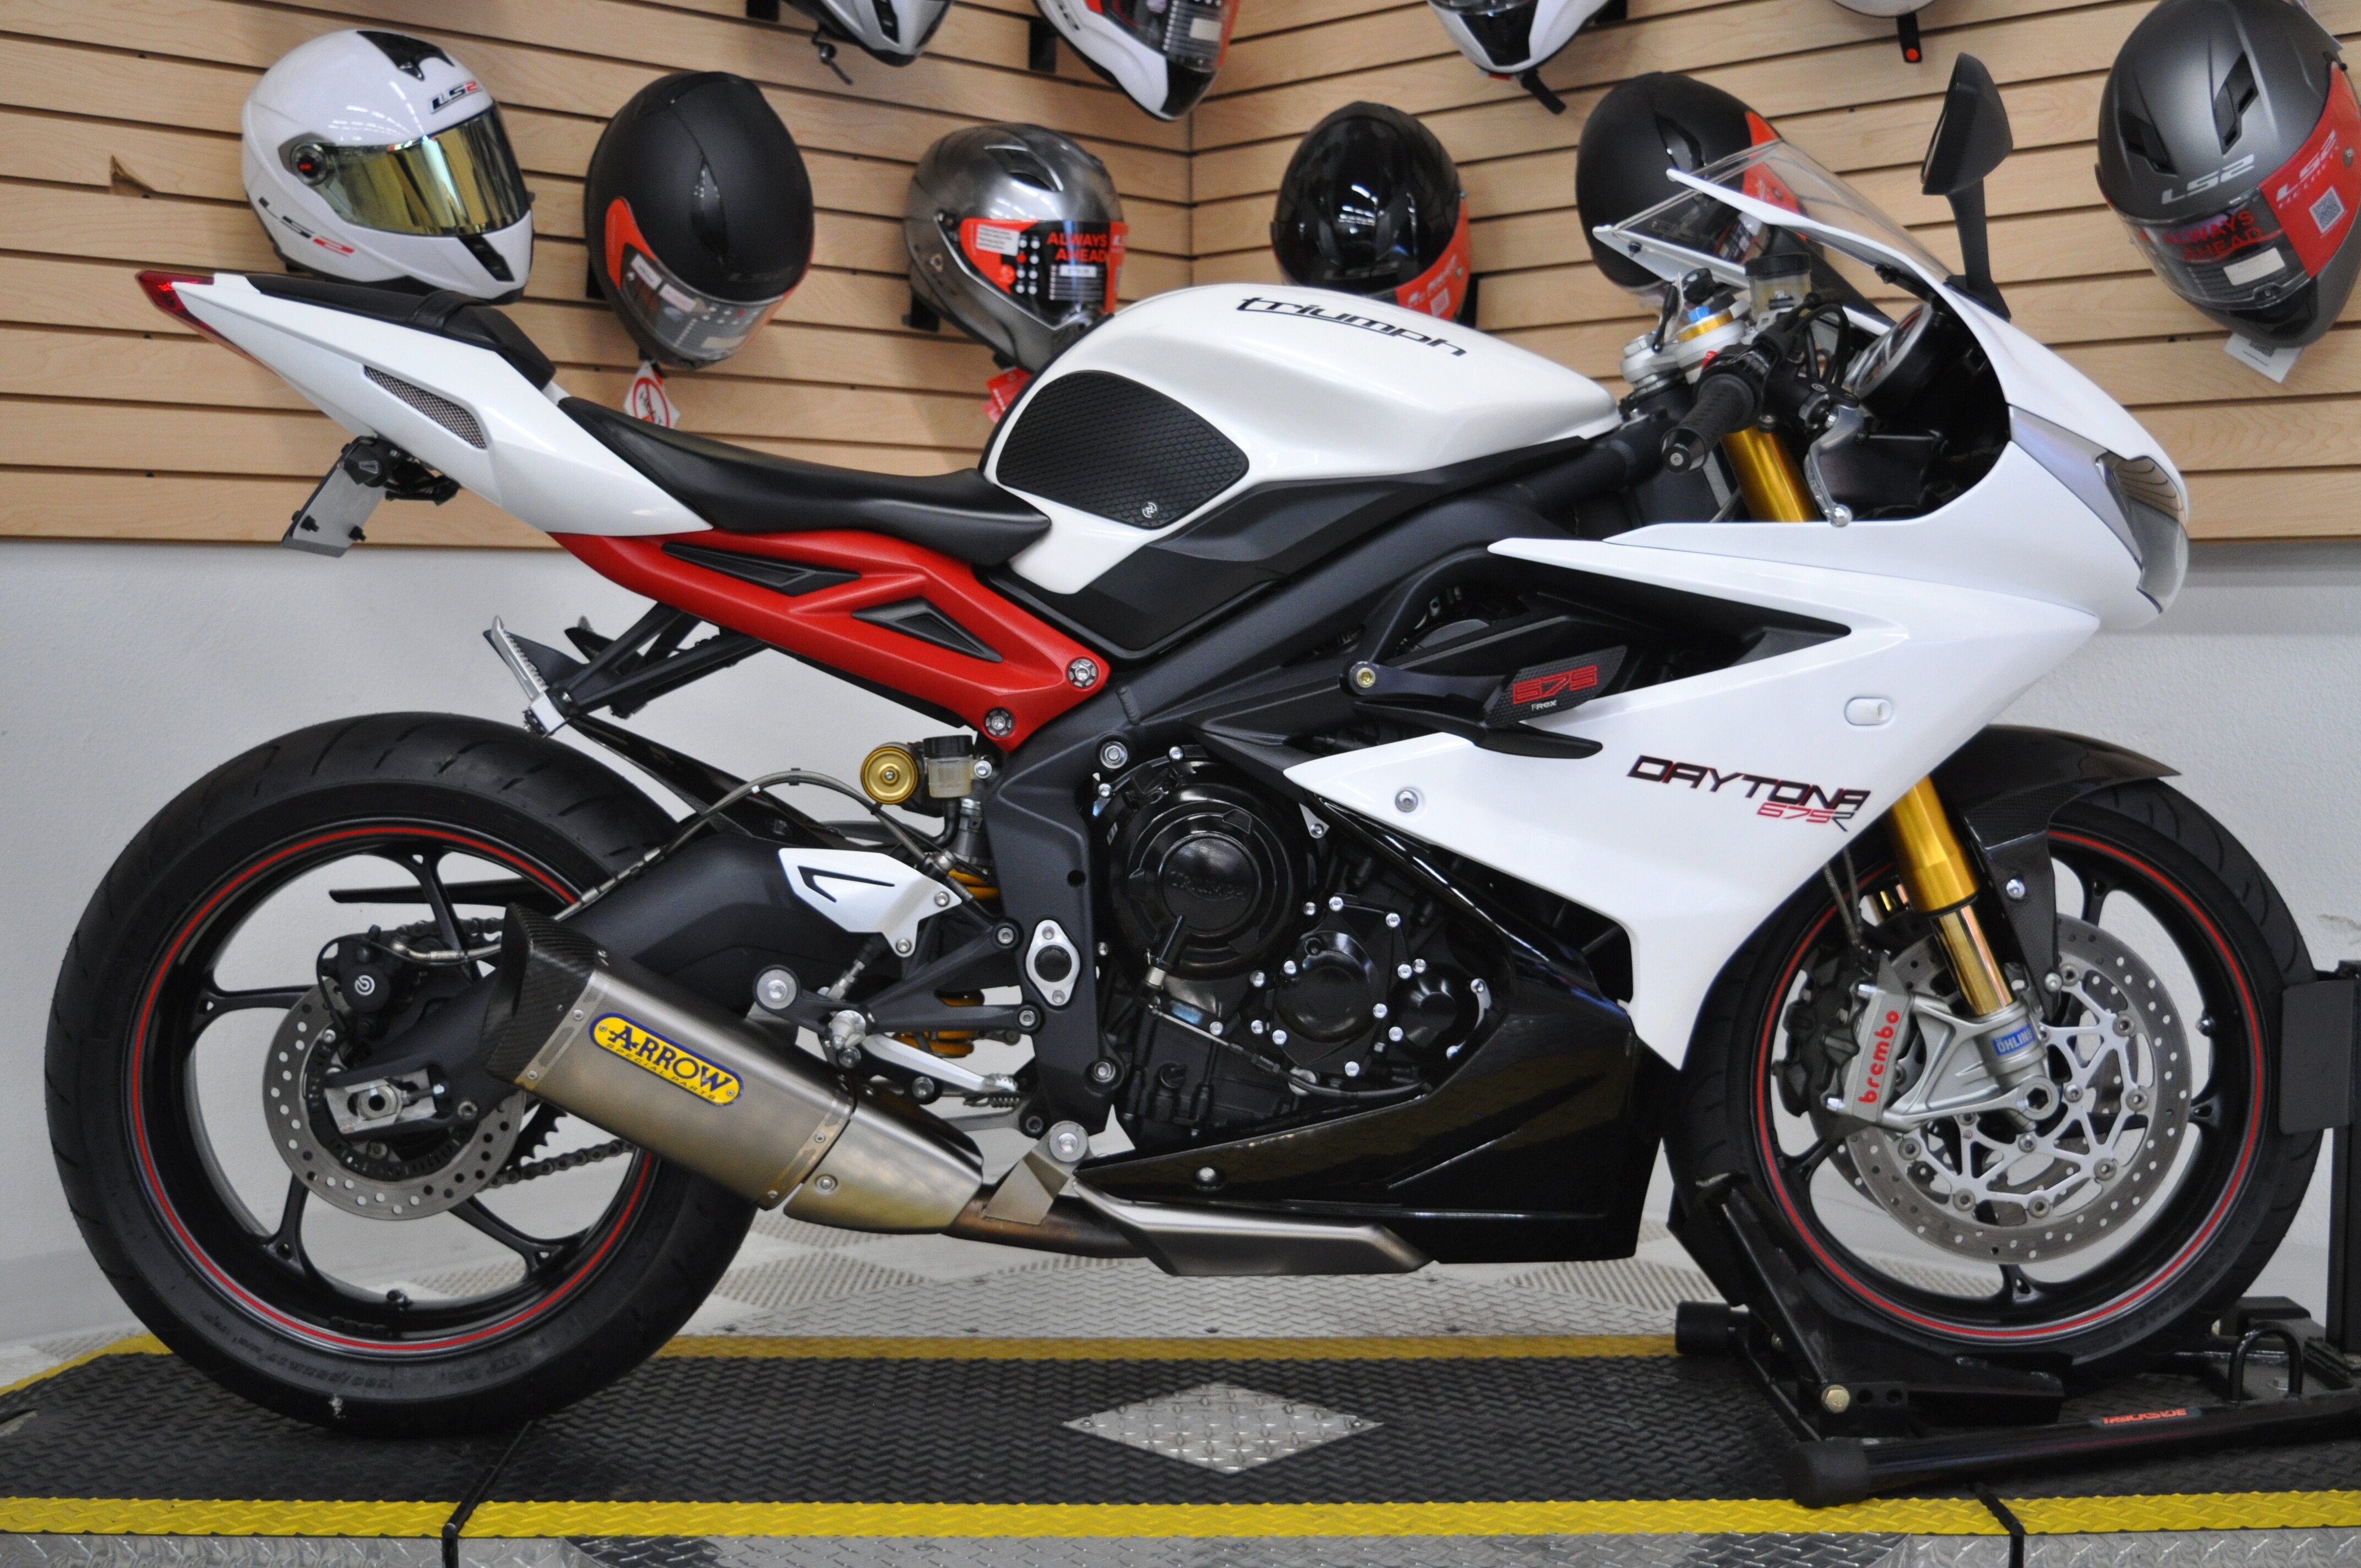 Triumph Daytona 675r Motorcycles For Sale Motorcycles On Autotrader